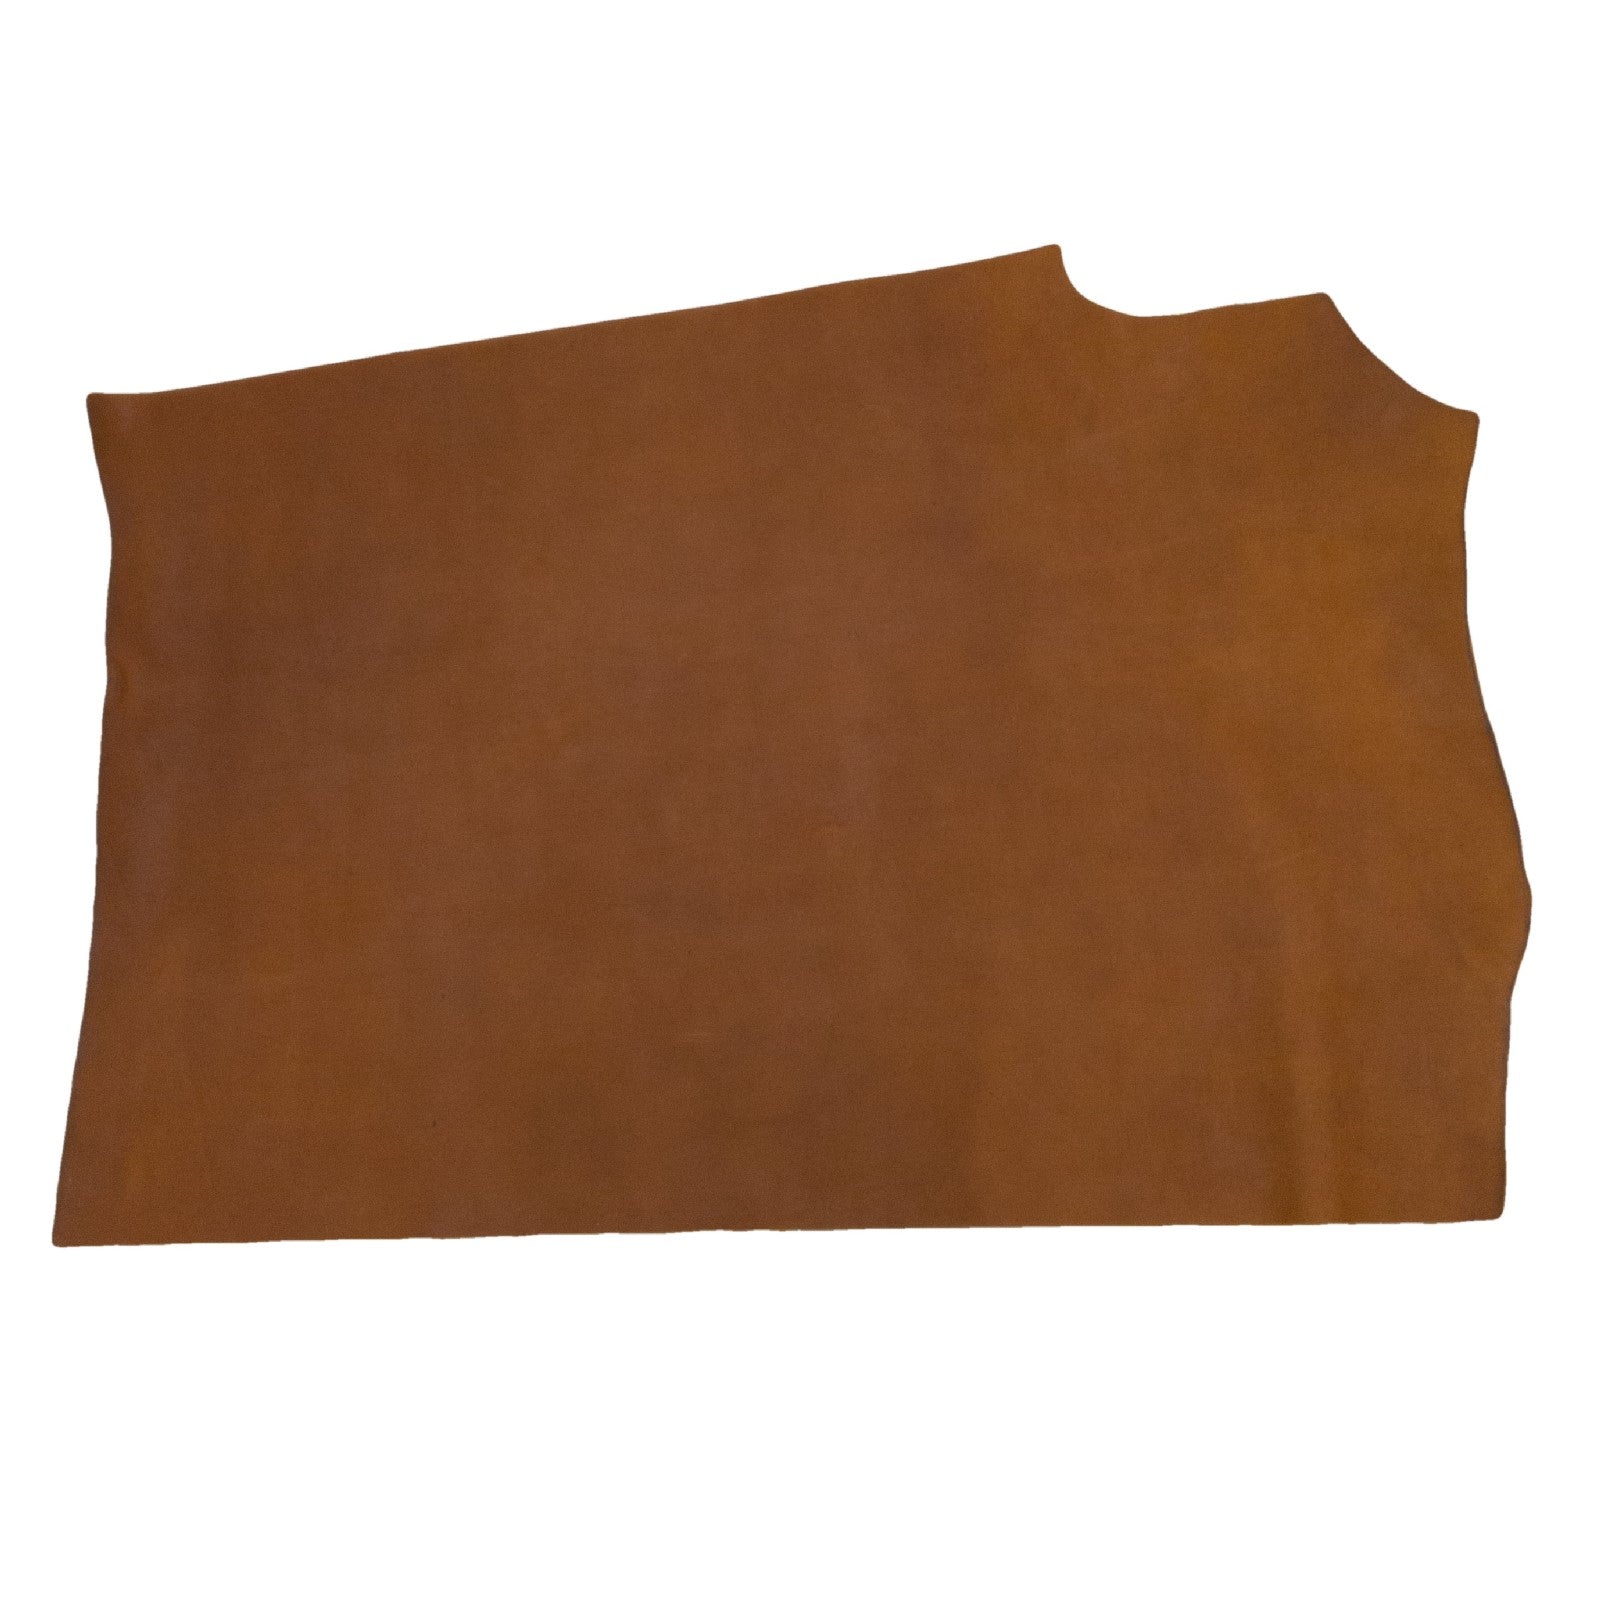 Rustic Russet Red Foothills, Oil Tanned Hides, Summits Edge, 6.5 - 7.5 Sq Ft / Project Piece (Middle) | The Leather Guy